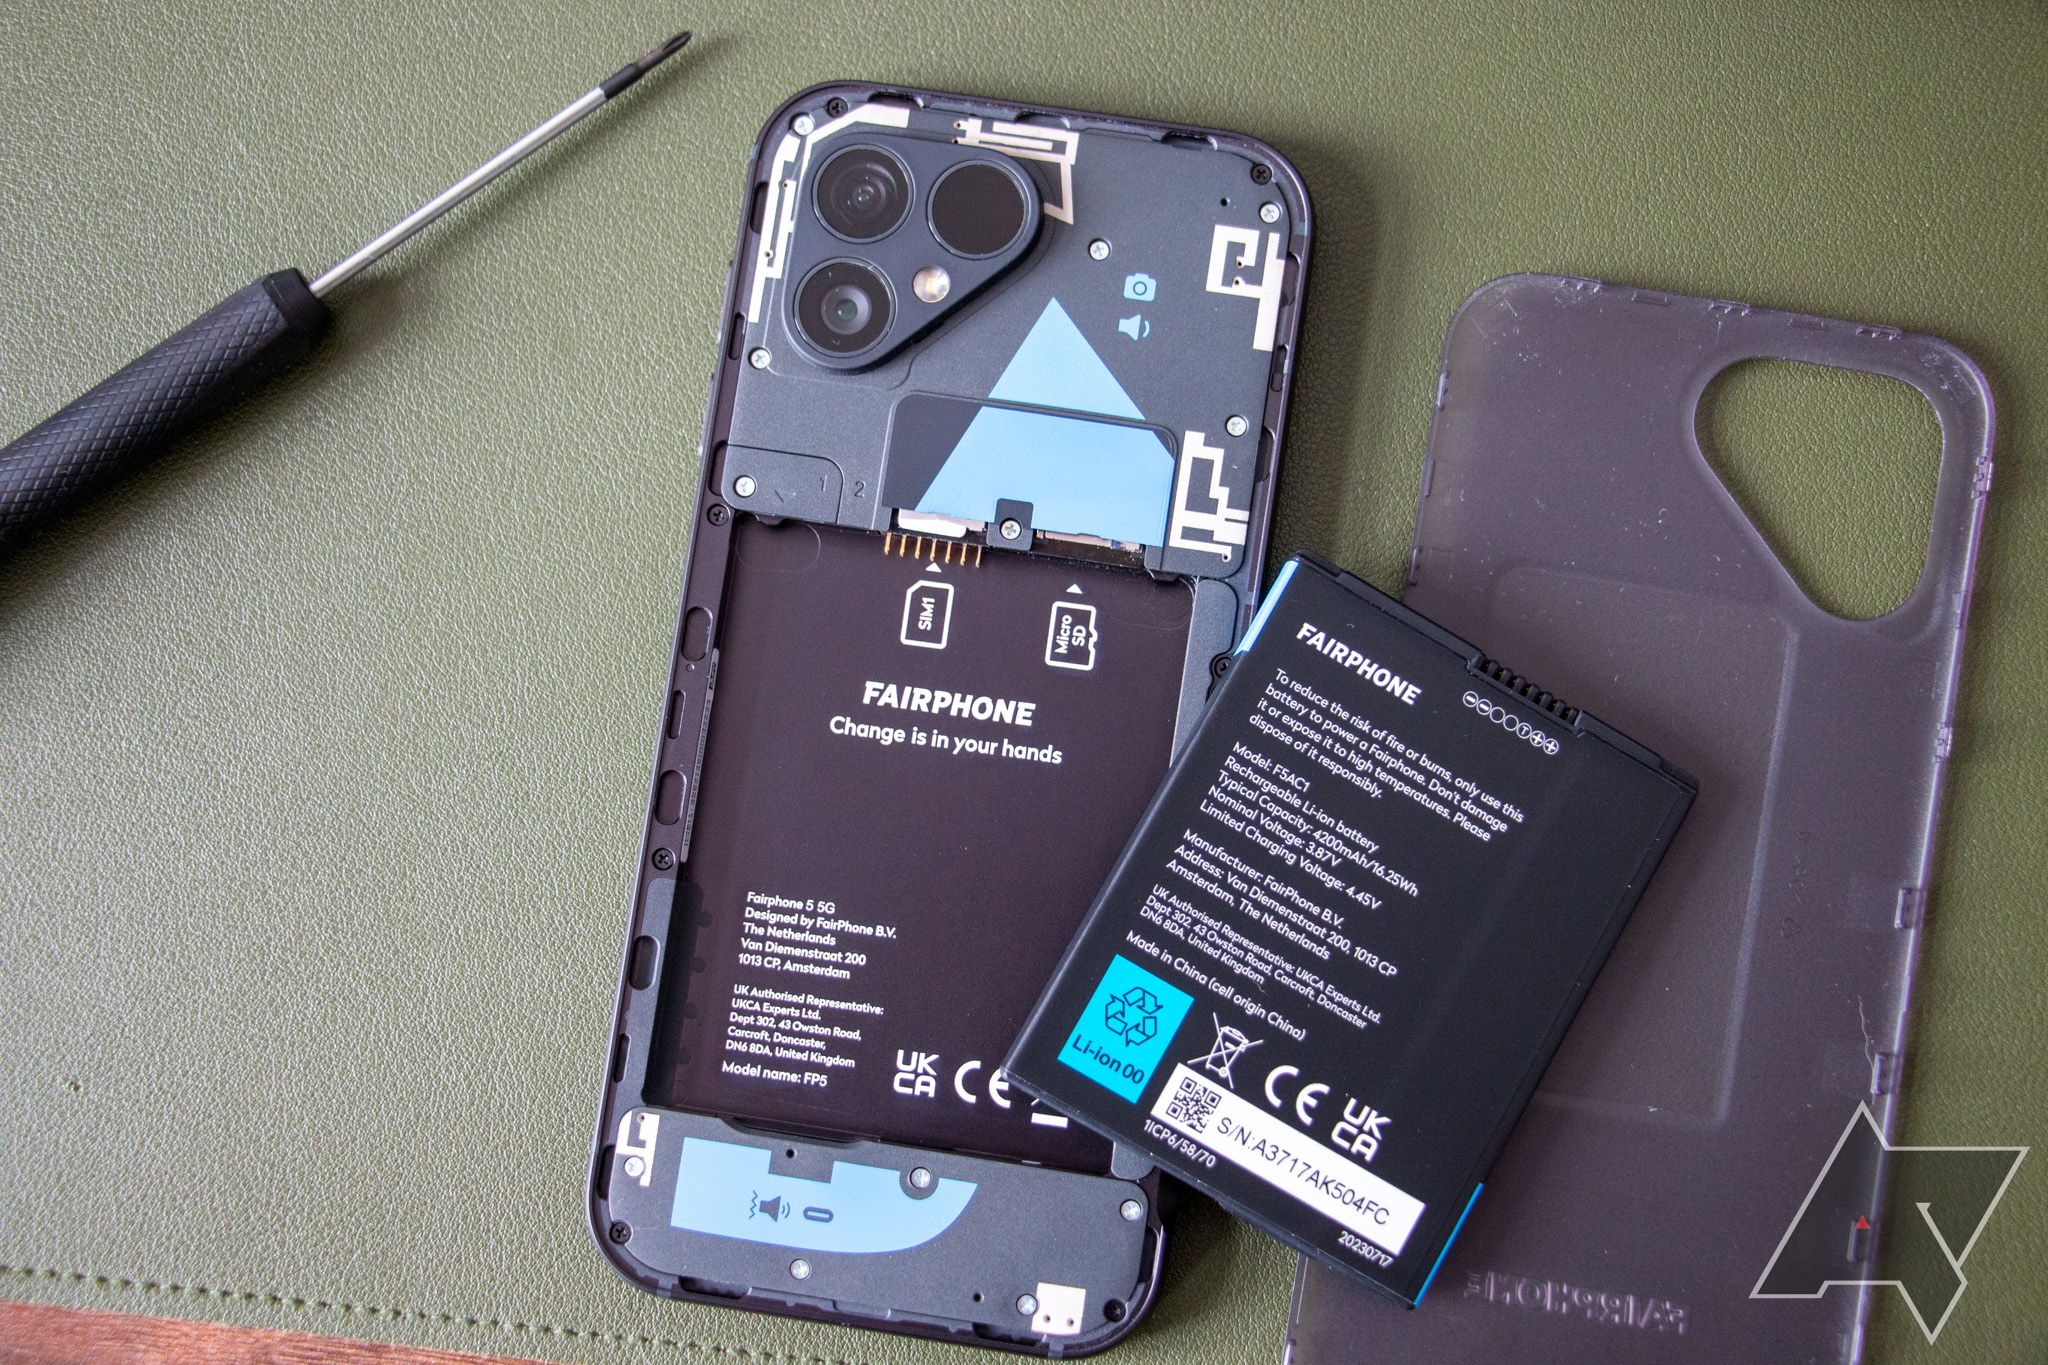 The Fairphone 5 has me looking forward to our repairable future